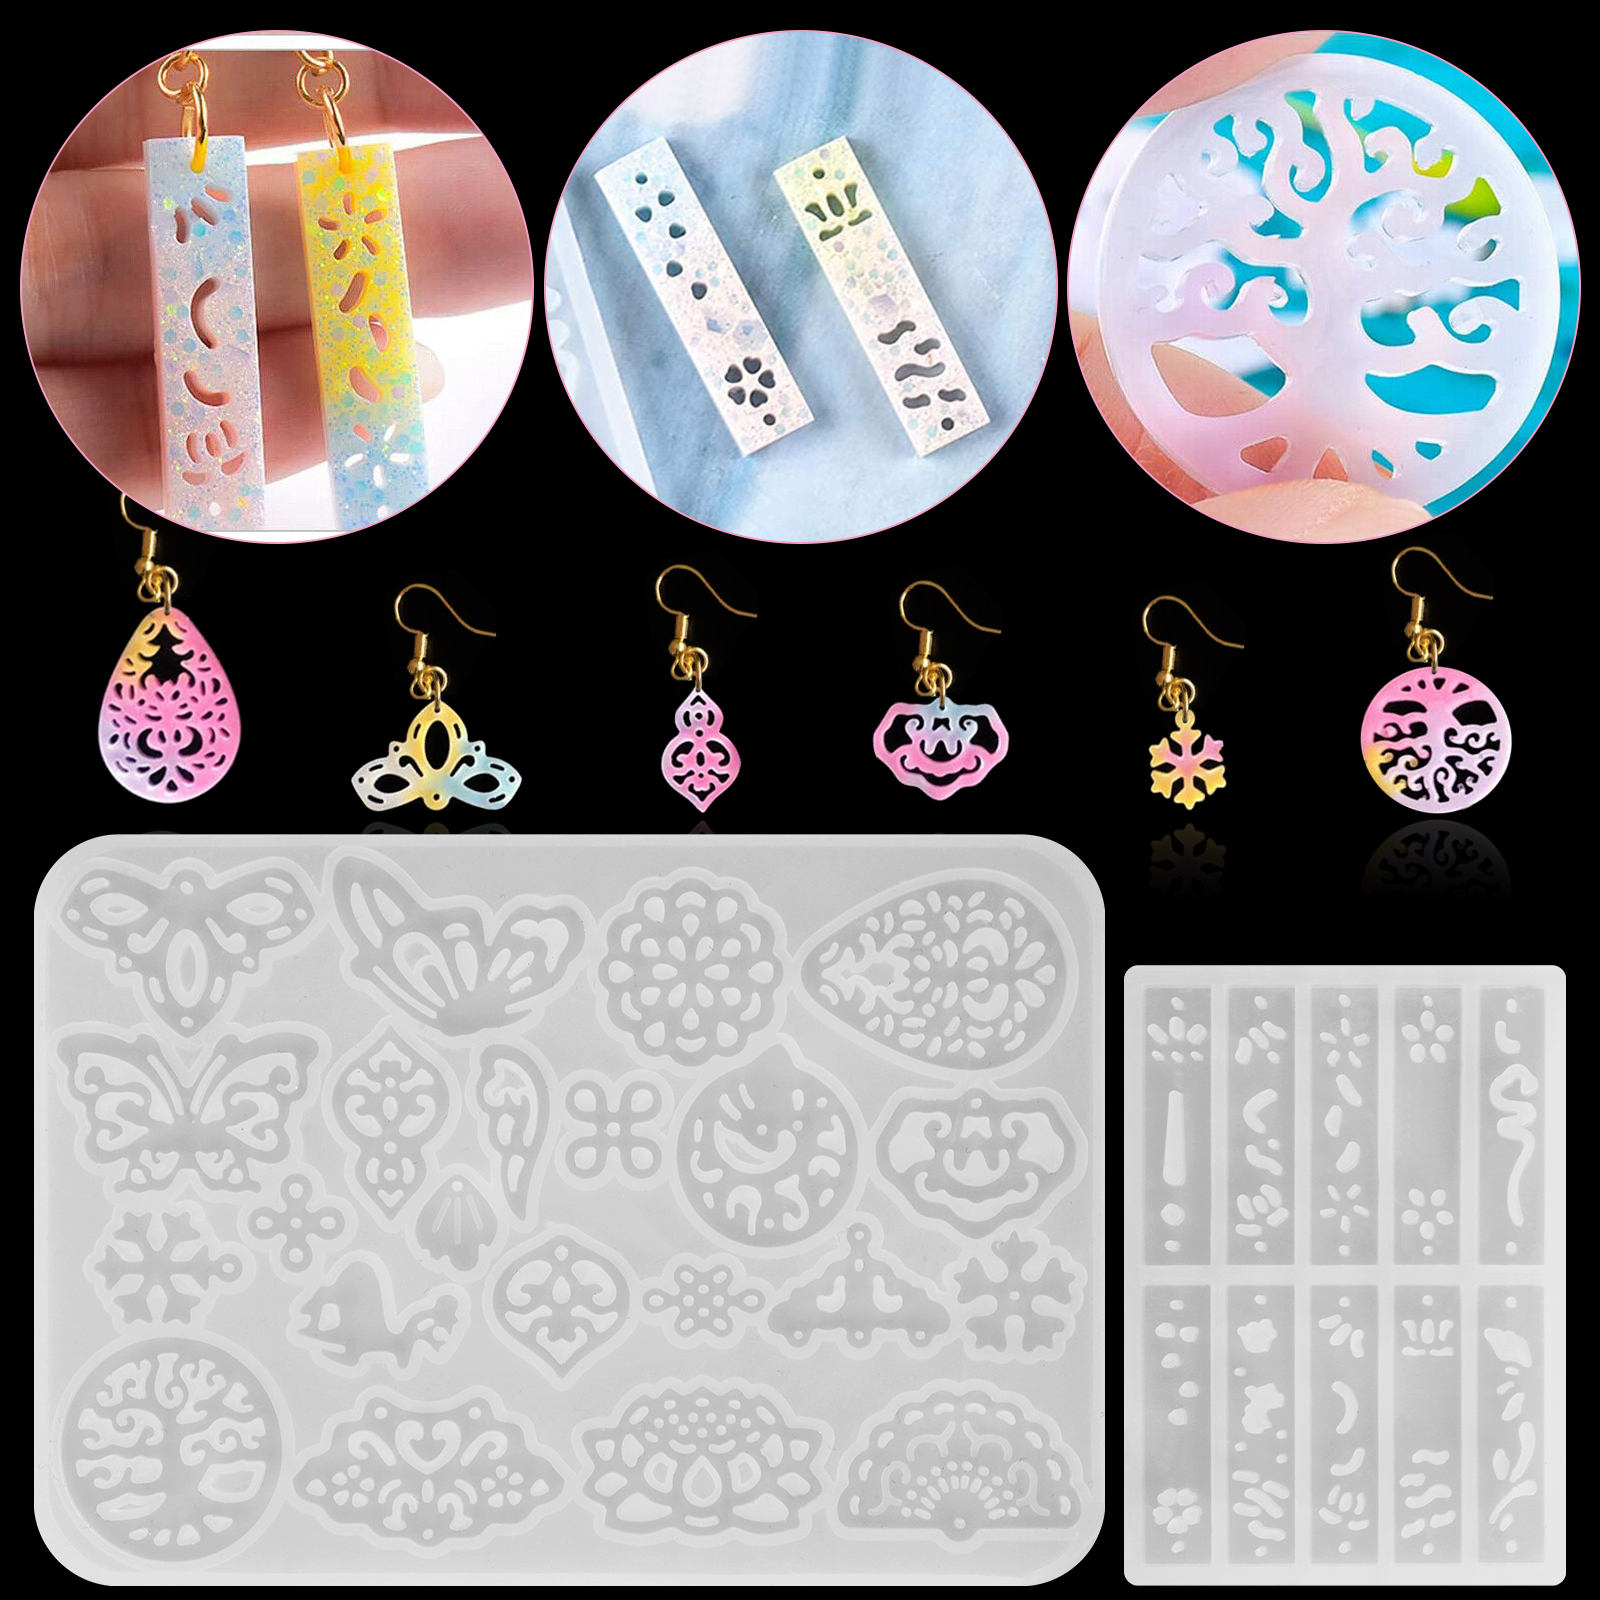 SkyAuks 31pcs Resin Jewelry Molds, Jewelry Casting Molds, Pendant Trays Making Kit, Silicone Molds for DIY Resin Pendants, Keychains, Earrings, Resin